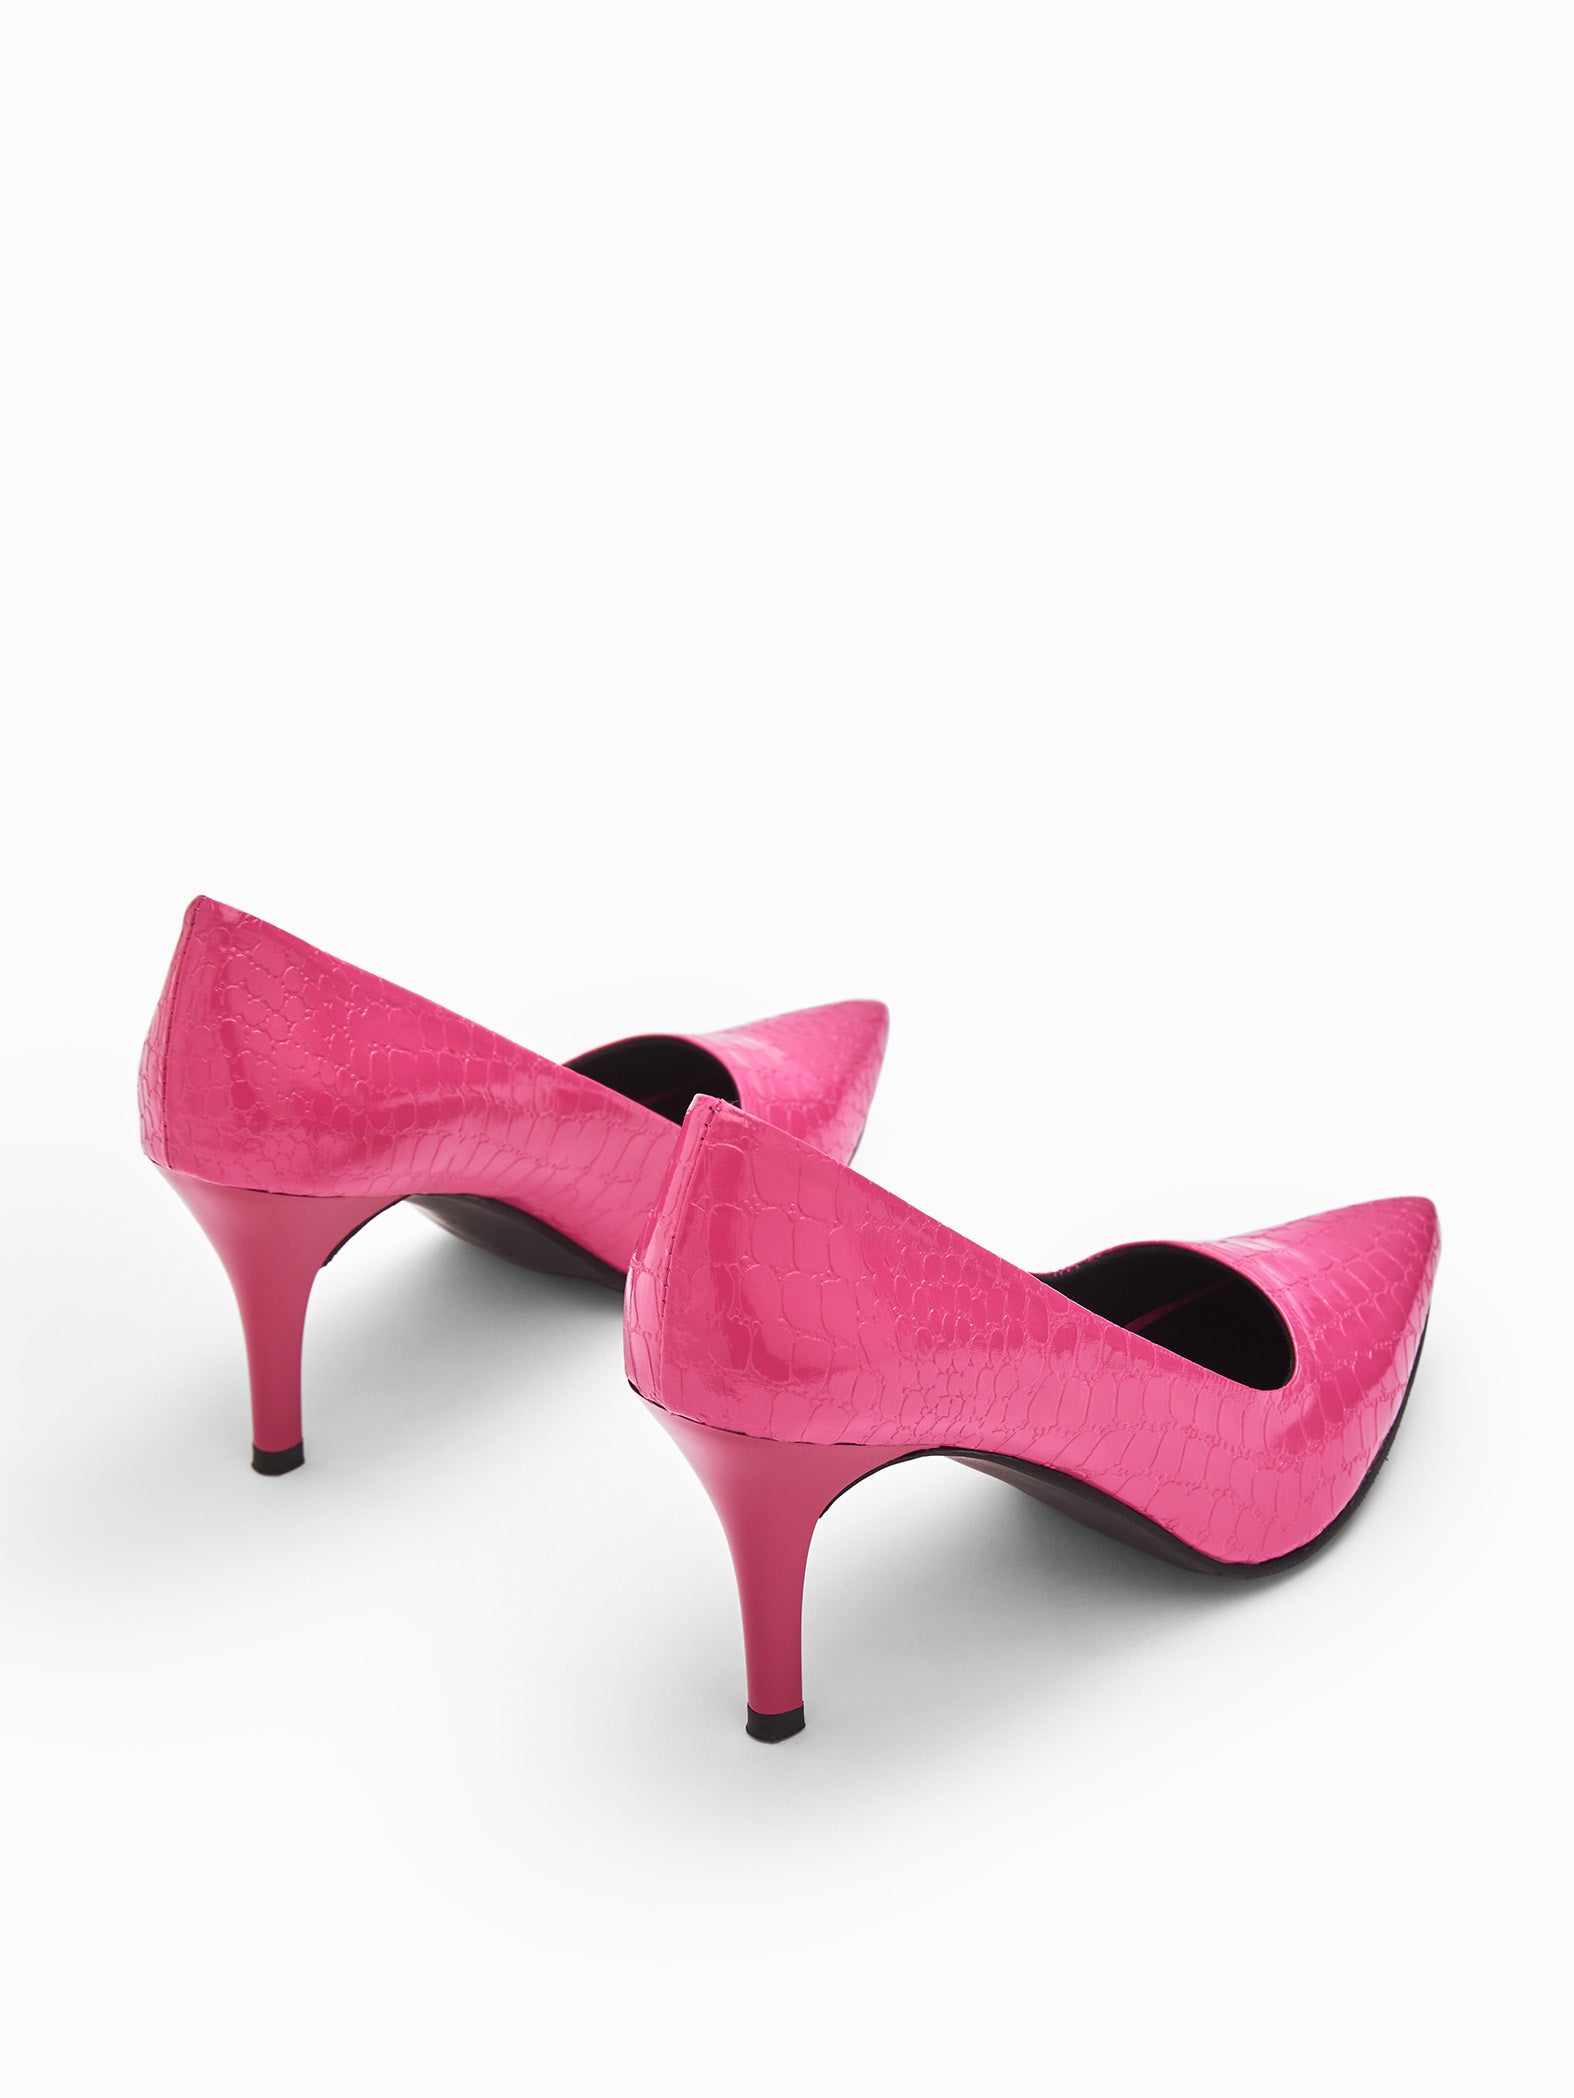 Pink Pointed Toe Textured Heels